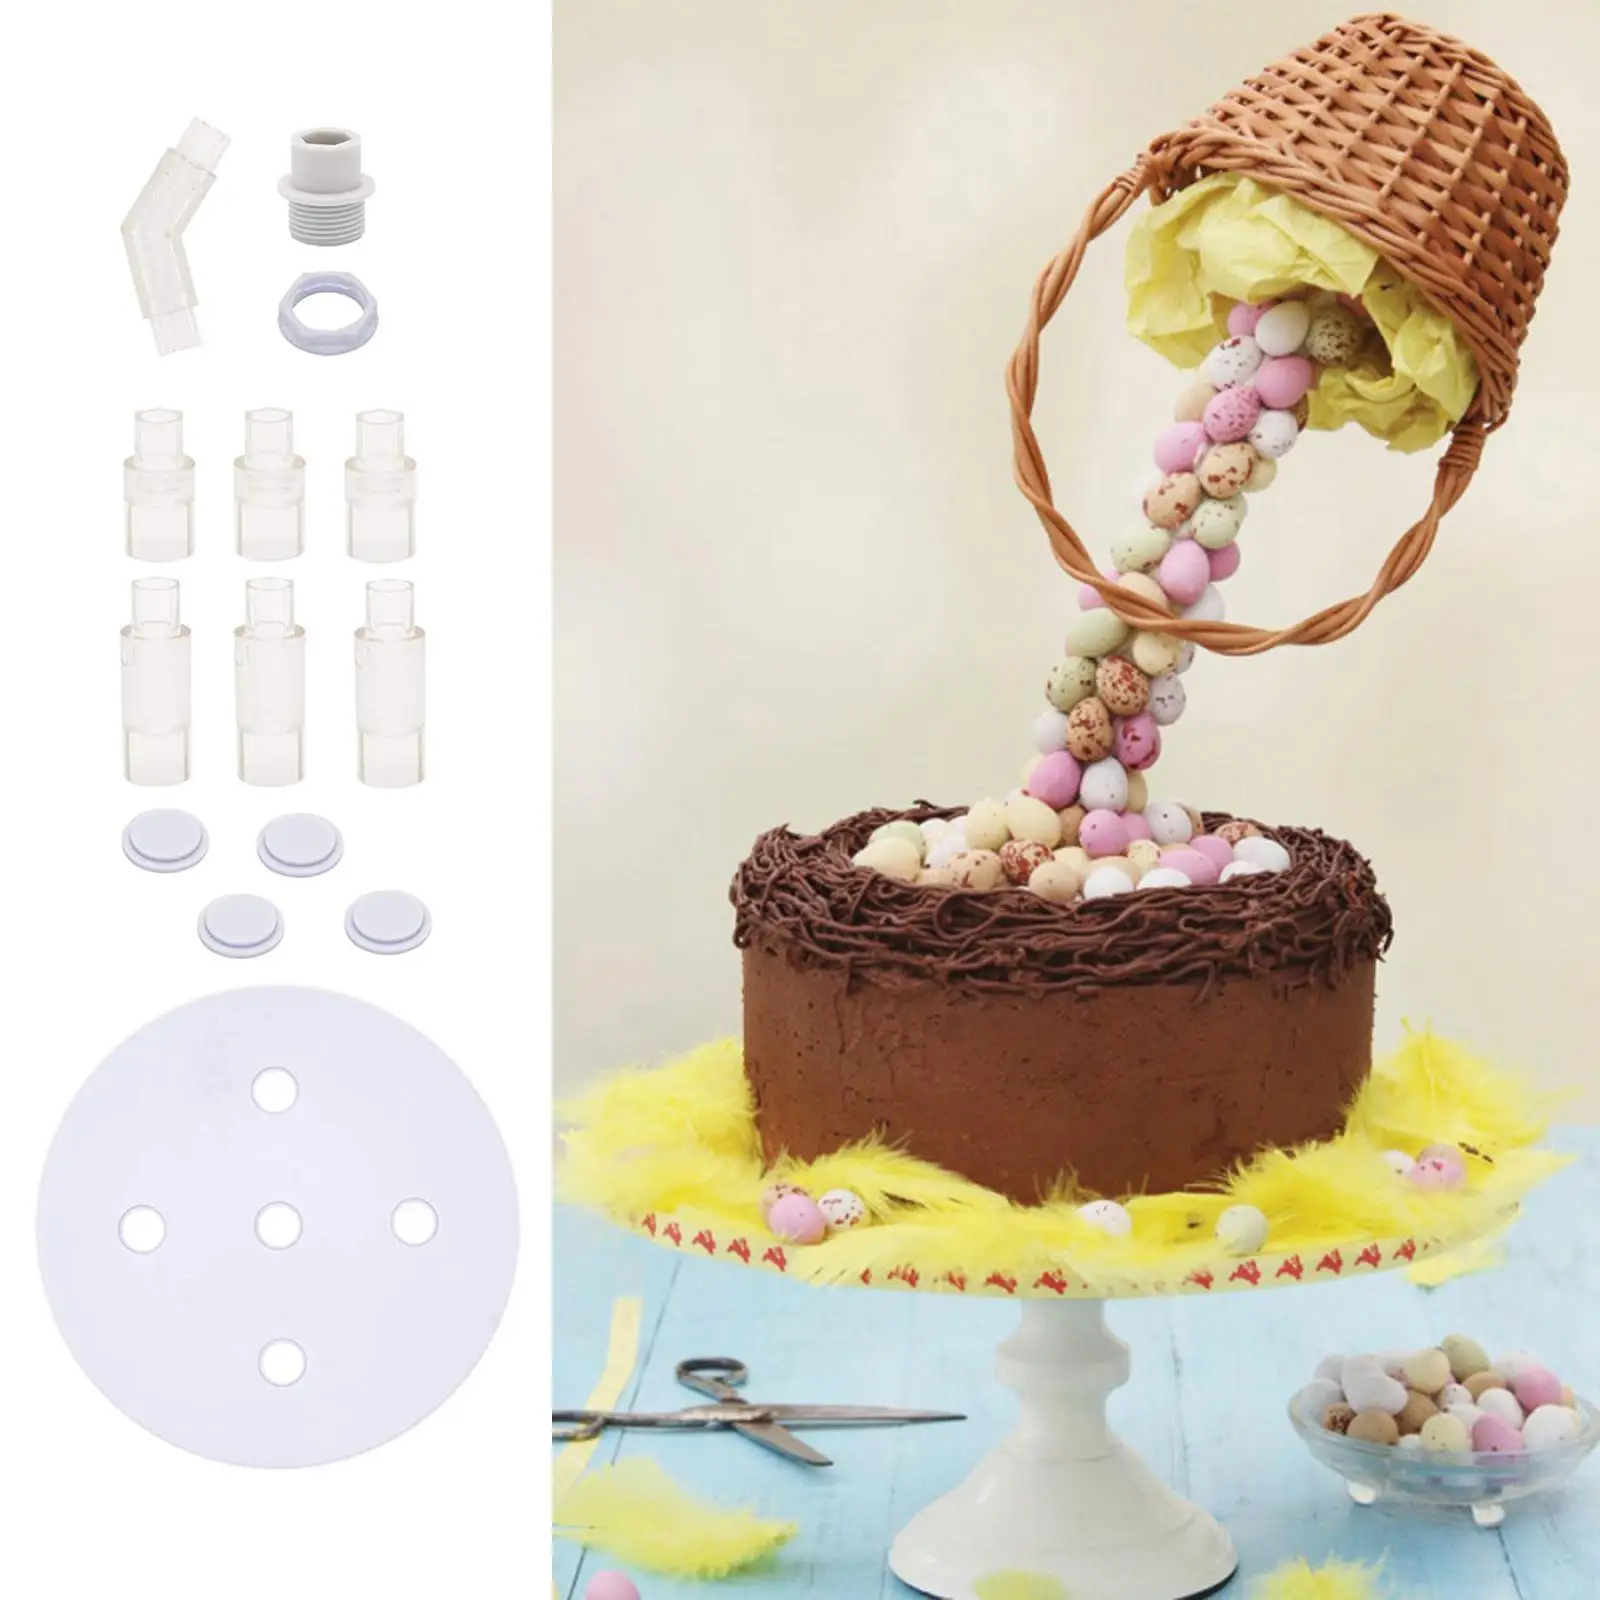 Cake Stand, DIY Cake Tools Cake Pouring Kit ,Hanging Decorative ,Reusable for Cake Decorating Party Wedding Anniversary Party